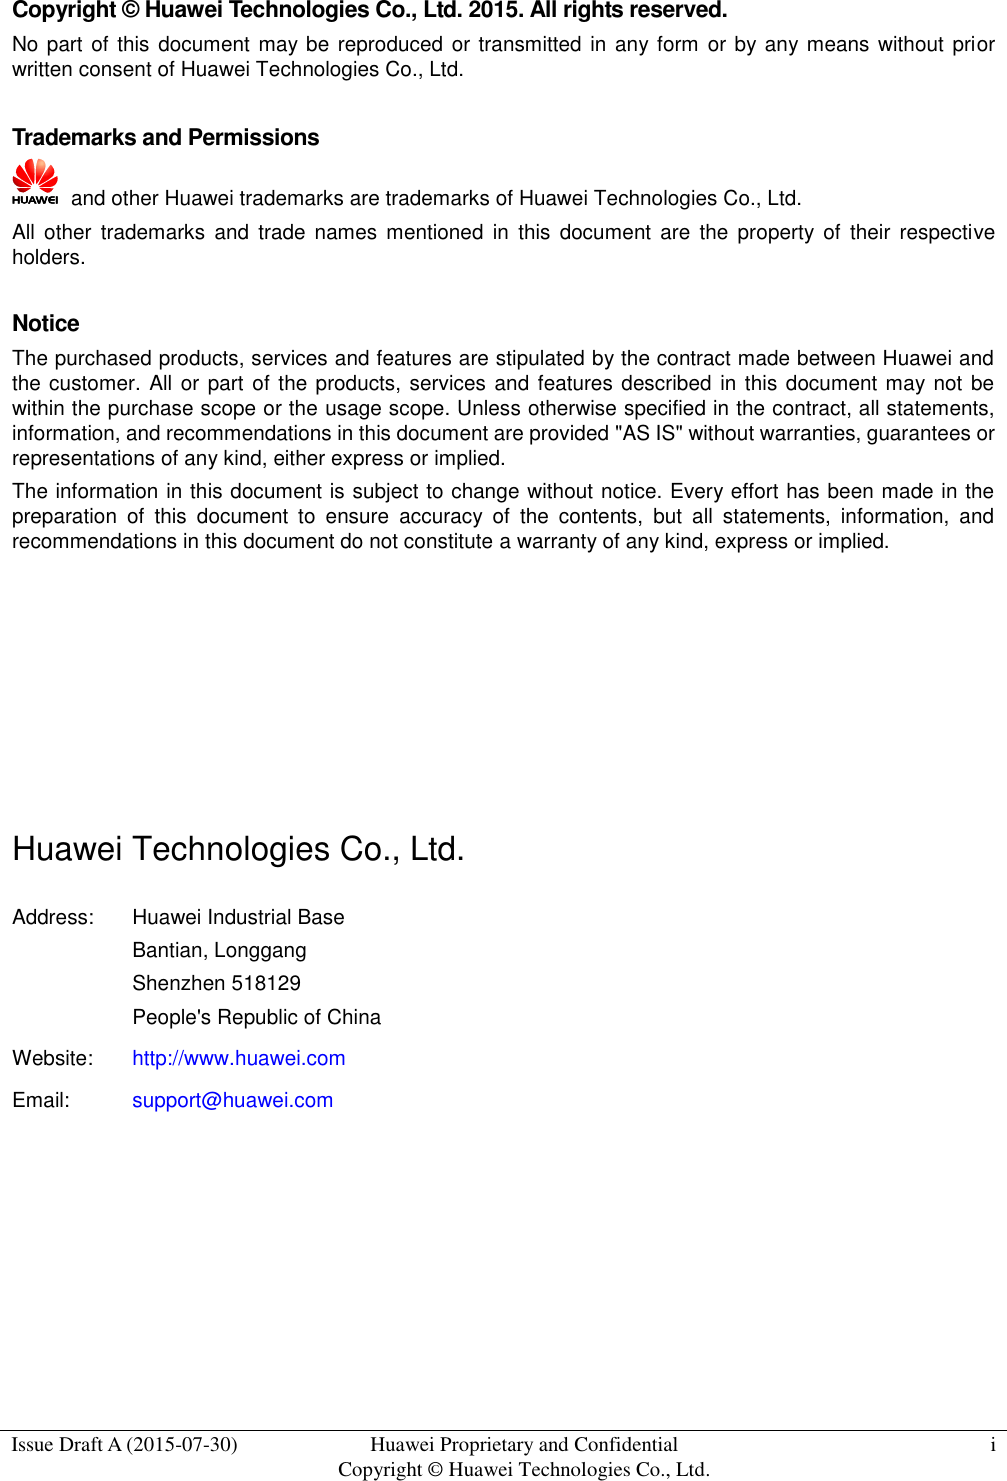  Issue Draft A (2015-07-30) Huawei Proprietary and Confidential           Copyright © Huawei Technologies Co., Ltd. i  Copyright © Huawei Technologies Co., Ltd. 2015. All rights reserved. No part of this  document may be reproduced or transmitted in  any  form or by any means without prior written consent of Huawei Technologies Co., Ltd.  Trademarks and Permissions   and other Huawei trademarks are trademarks of Huawei Technologies Co., Ltd. All  other  trademarks  and  trade names mentioned  in  this  document are  the  property  of  their  respective holders.  Notice The purchased products, services and features are stipulated by the contract made between Huawei and the customer. All or part of the products, services and features described in this document may not  be within the purchase scope or the usage scope. Unless otherwise specified in the contract, all statements, information, and recommendations in this document are provided &quot;AS IS&quot; without warranties, guarantees or representations of any kind, either express or implied. The information in this document is subject to change without notice. Every effort has been made in the preparation  of  this  document  to  ensure  accuracy  of  the  contents,  but  all  statements,  information,  and recommendations in this document do not constitute a warranty of any kind, express or implied.       Huawei Technologies Co., Ltd. Address: Huawei Industrial Base Bantian, Longgang Shenzhen 518129 People&apos;s Republic of China Website: http://www.huawei.com Email: support@huawei.com   